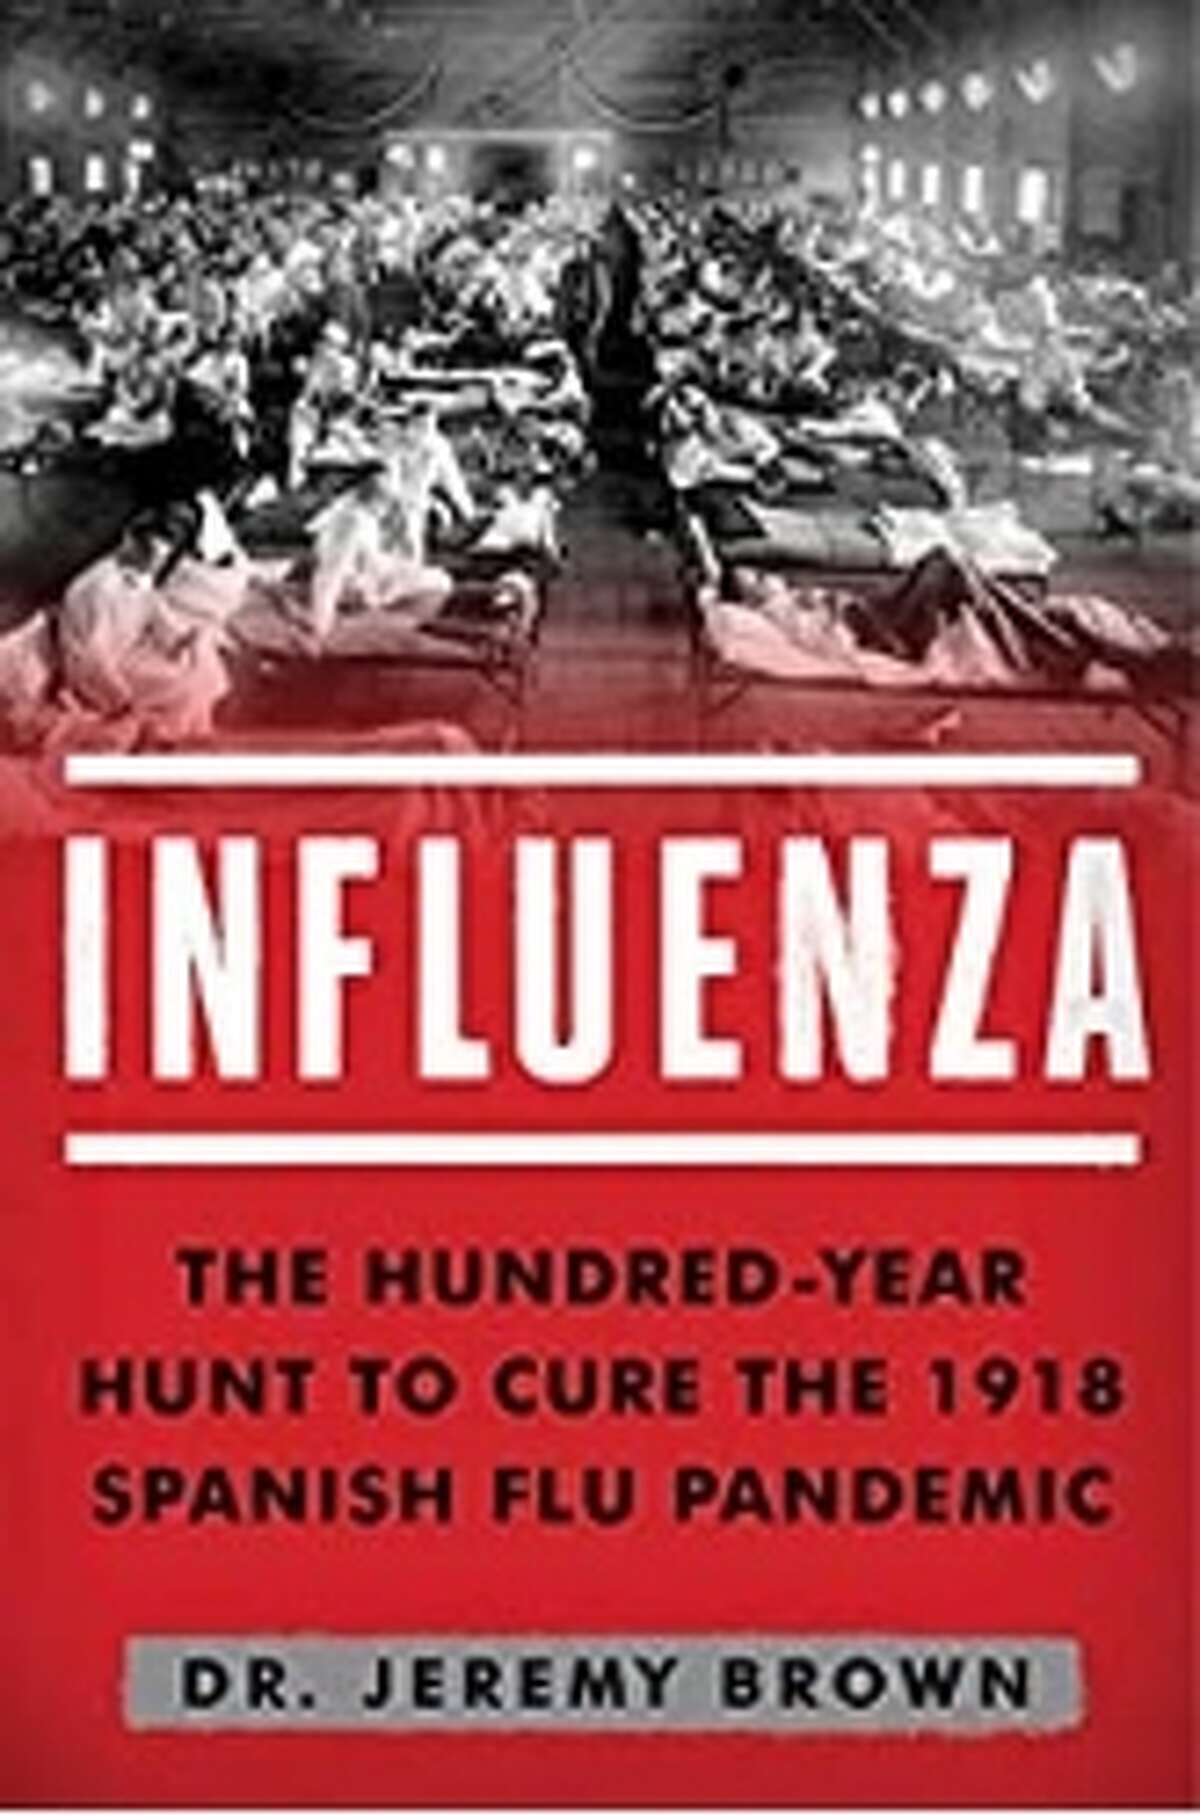 Influenza: The Hundred-Year Hunt to Cure the Deadliest Disease in HistoryDr. Jeremy BrownNot only is this book a compelling history of the 1918 Flu Pandemic, but the chapters about our current lack of preparation for “the next flu pandemic” are a tragic relic of pre-COVID-19 America. “Influenza: The Hundred-Year Hunt to Cure the1918 Spanish Flu Pandemic” by Dr. Jeremy Brown is $2.99 on Kindle, and $32.99 with Library Binding at Amazon.